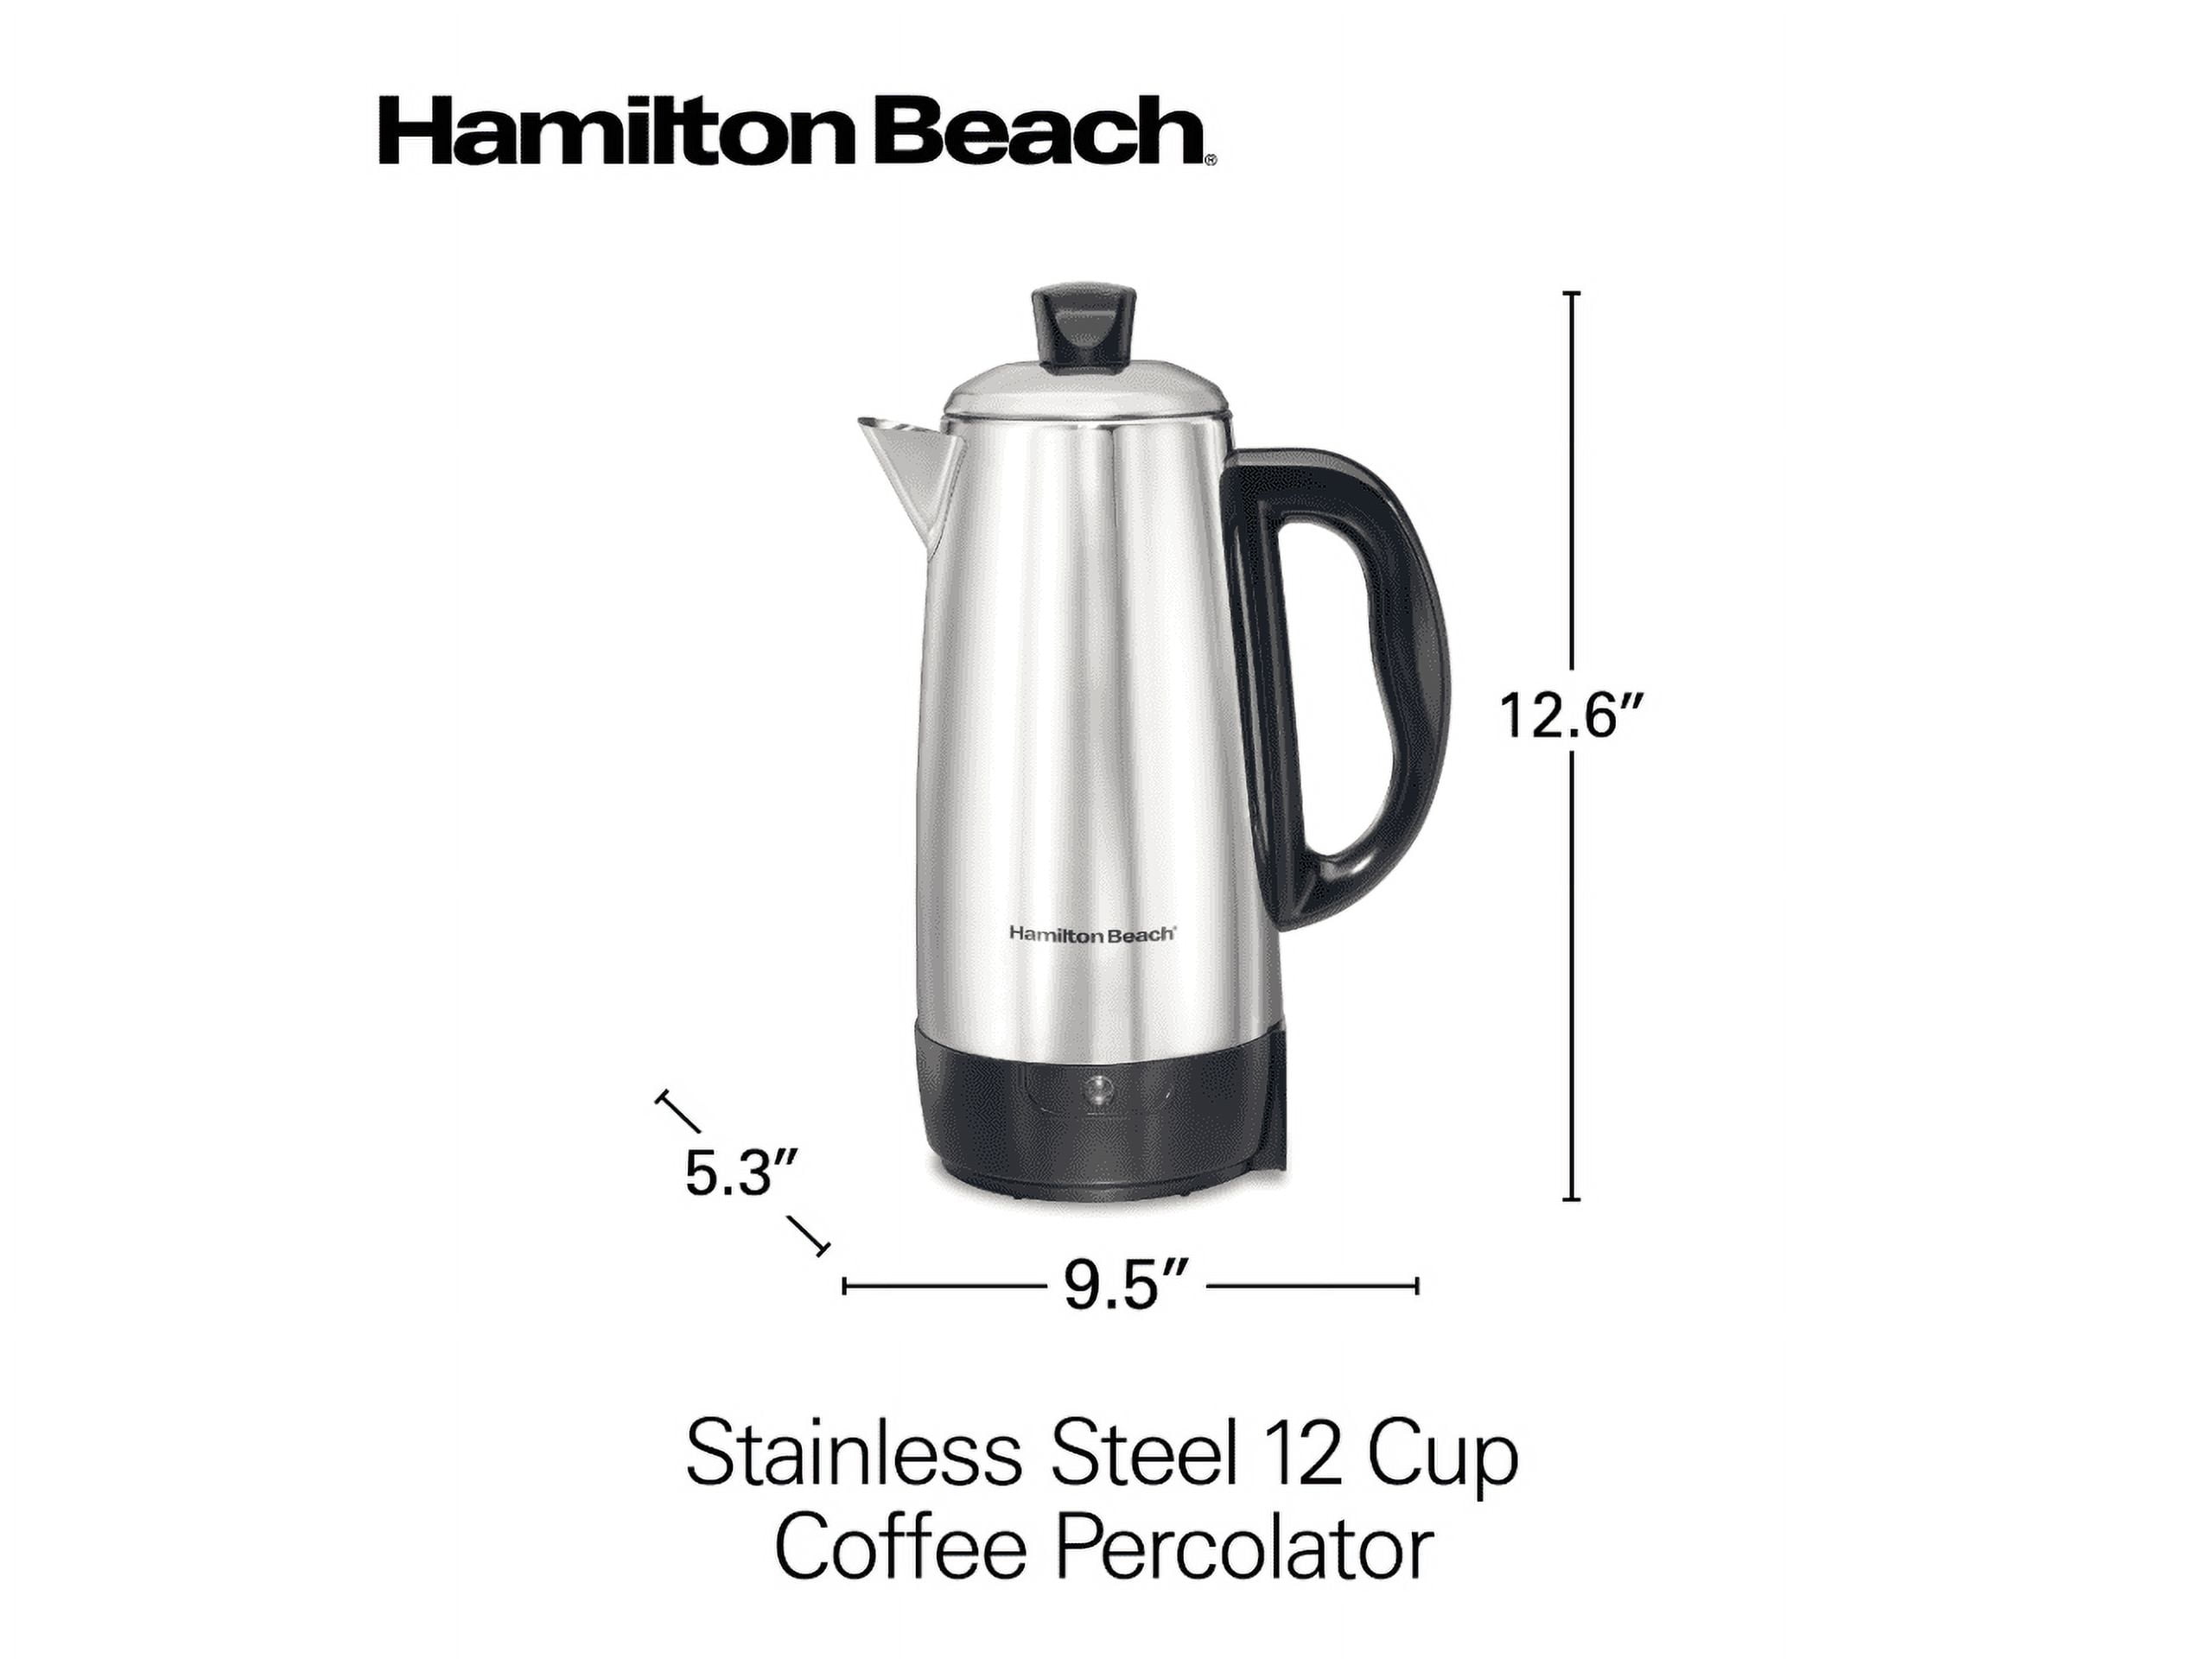 Hamilton Beach 12 Cup Stainless Steel Electric Percolator, Model